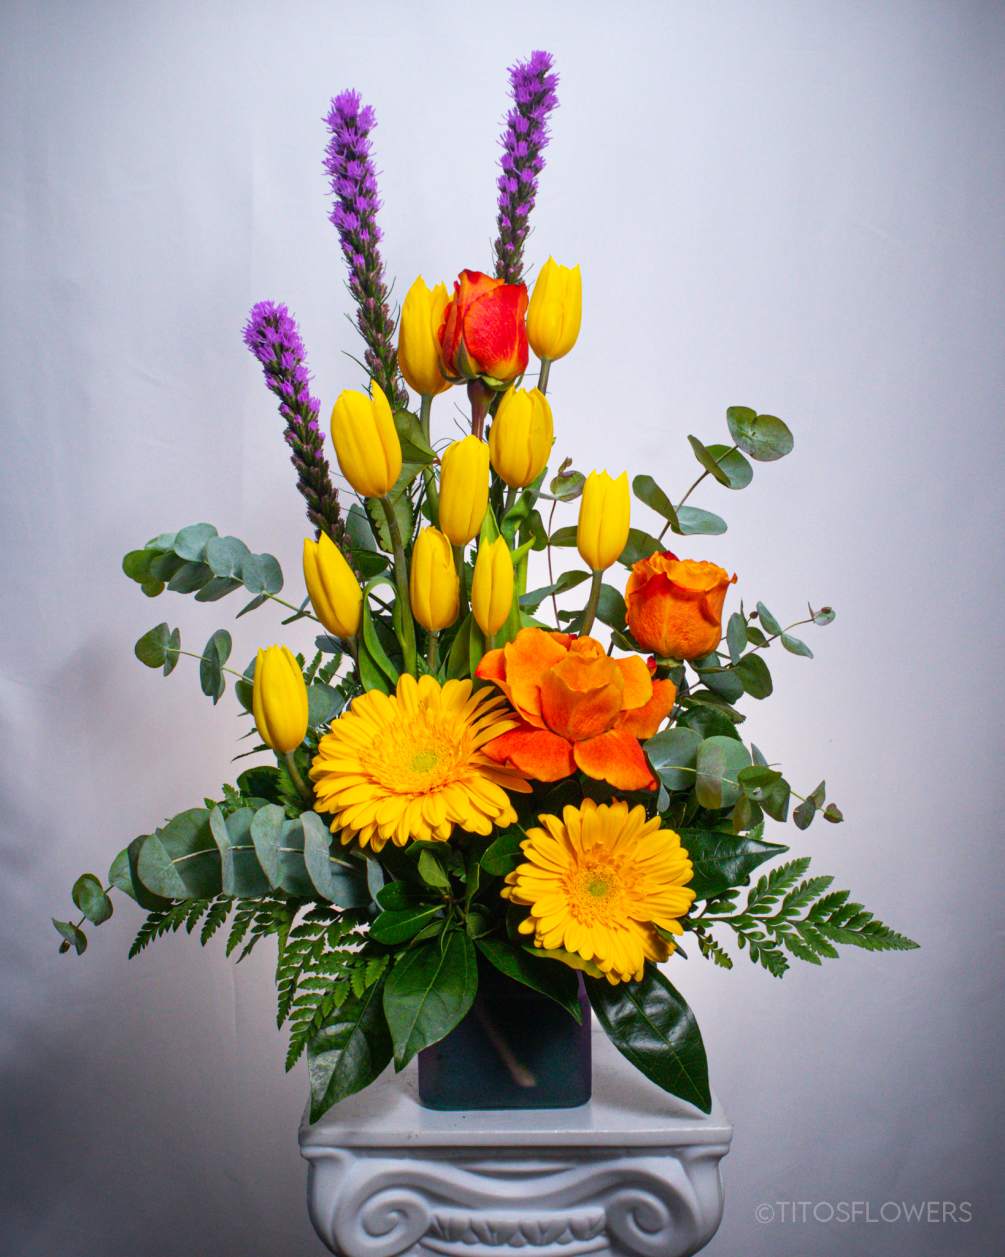 &ldquo;Experience the harmony of a sunset with our captivating arrangement, Golden Glow